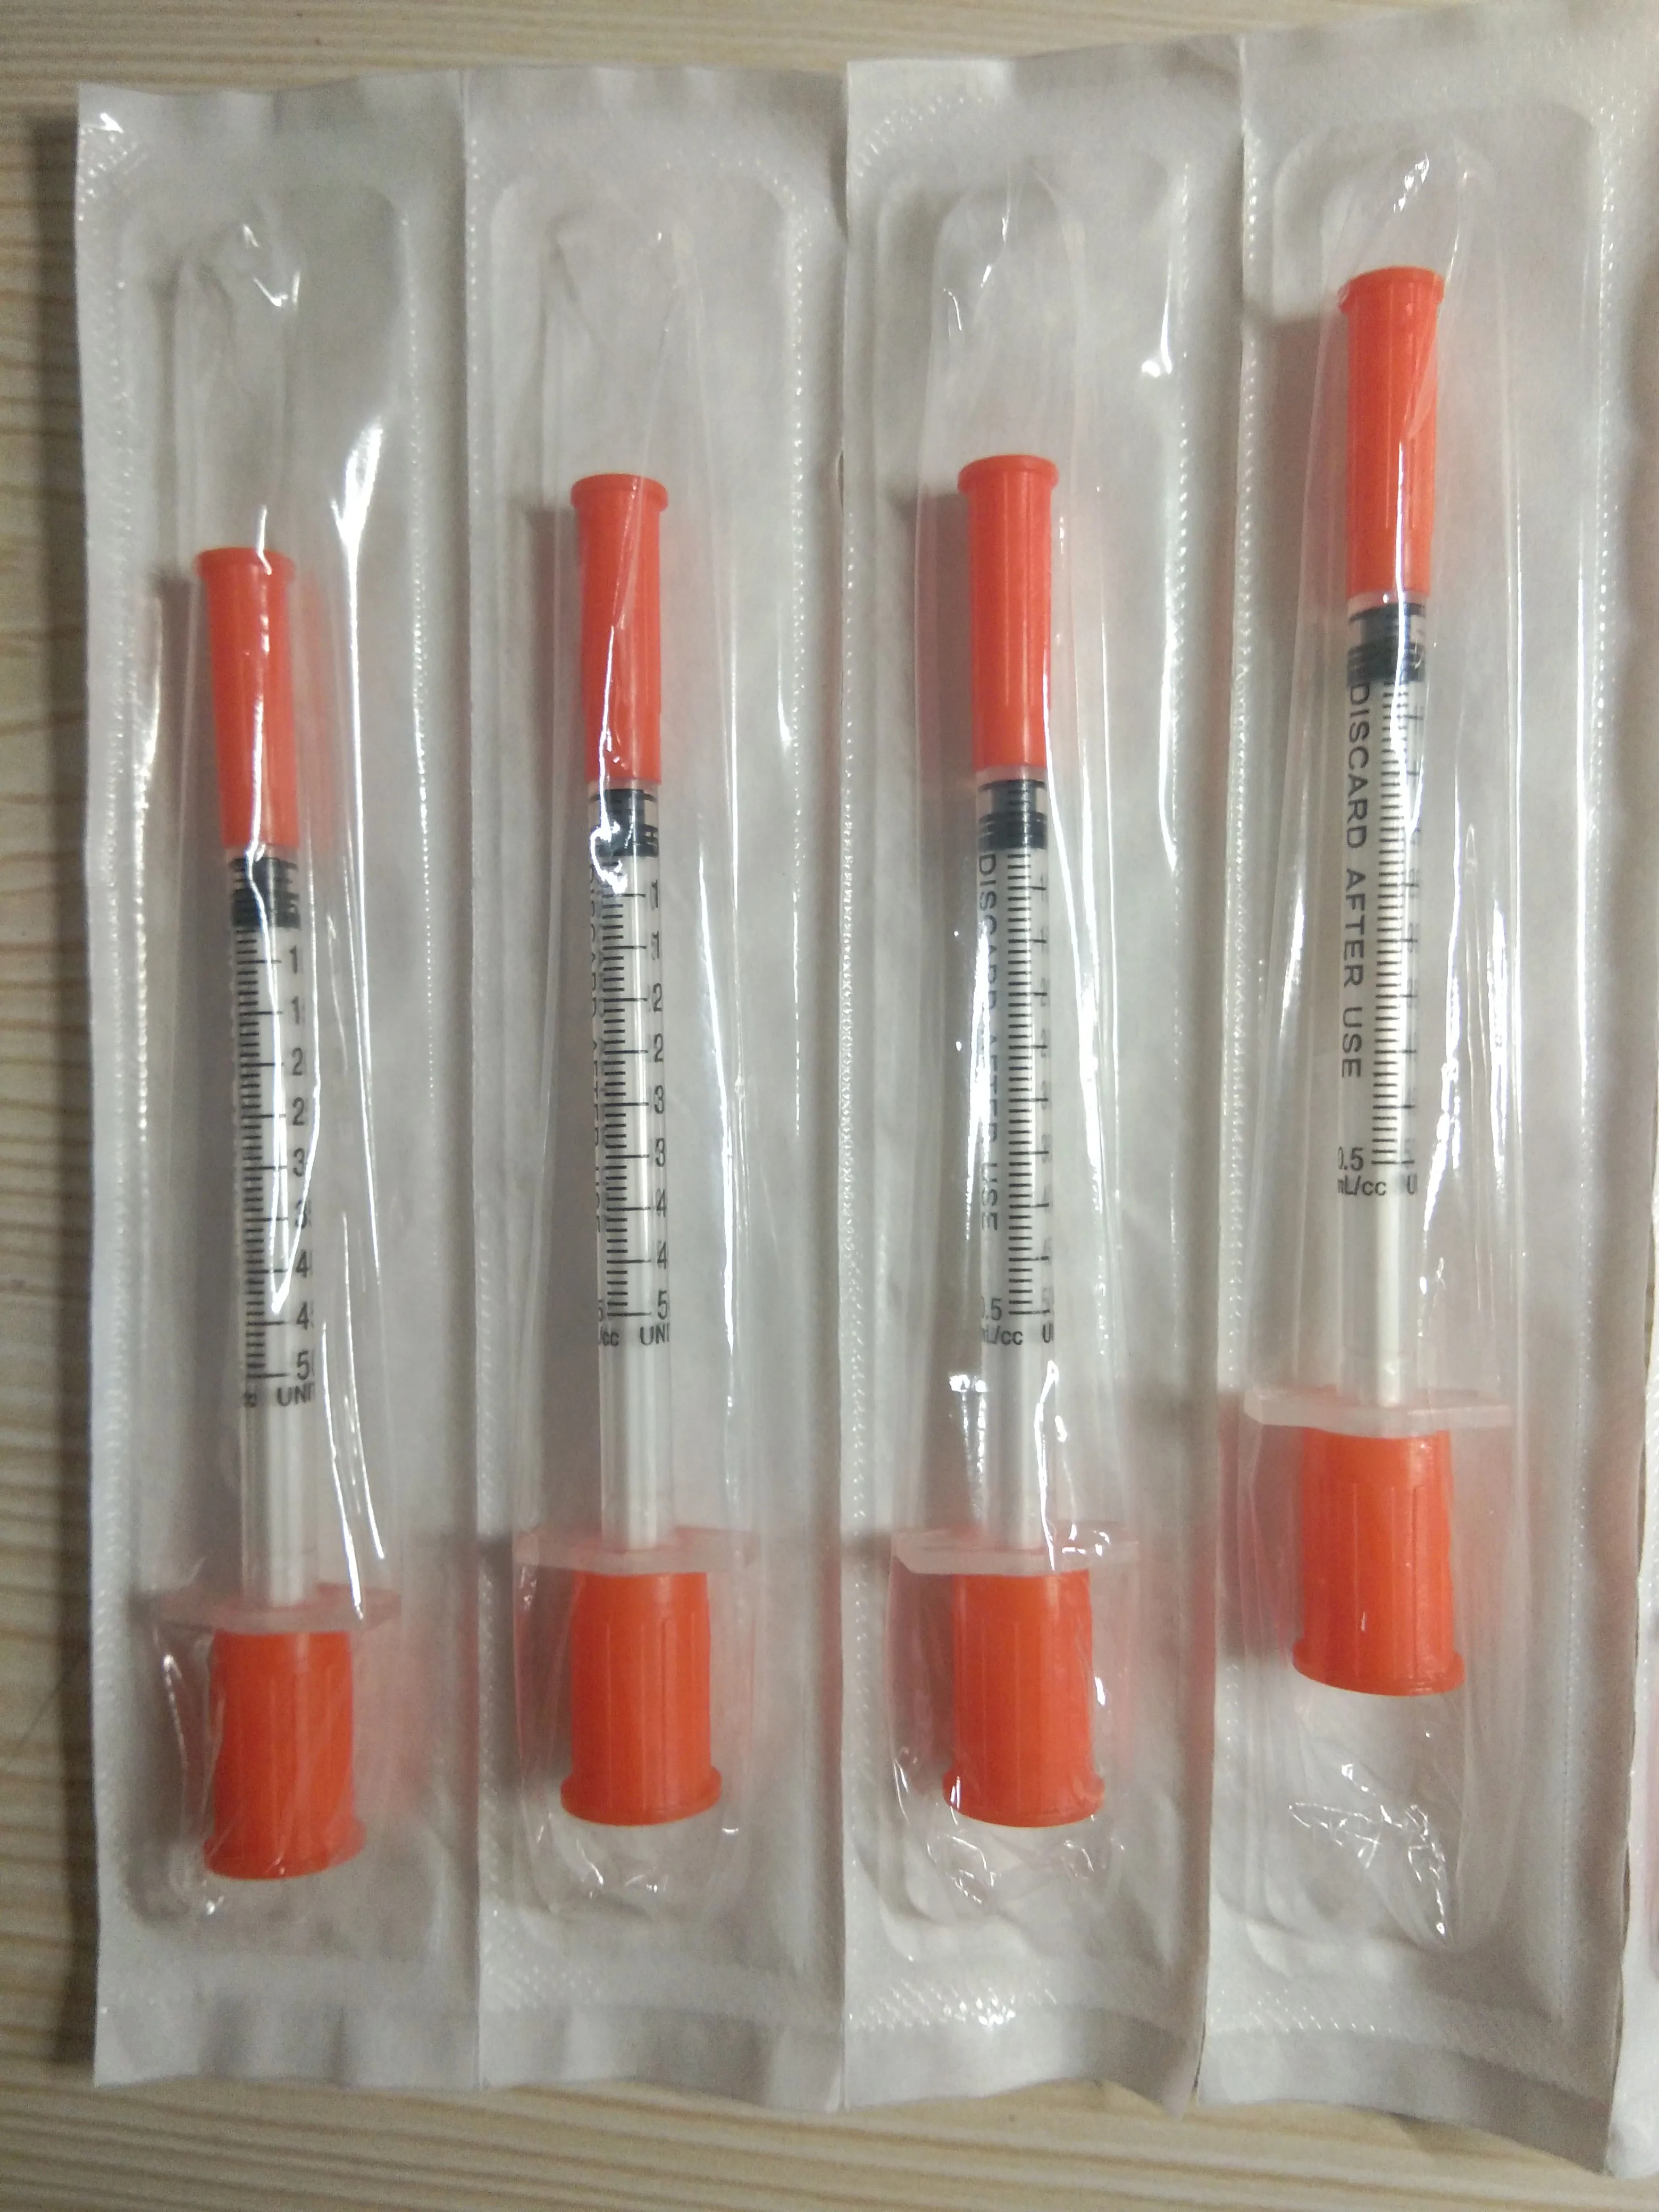 
insulin syringe for diabetes used medical grade stainless steel SUS304 